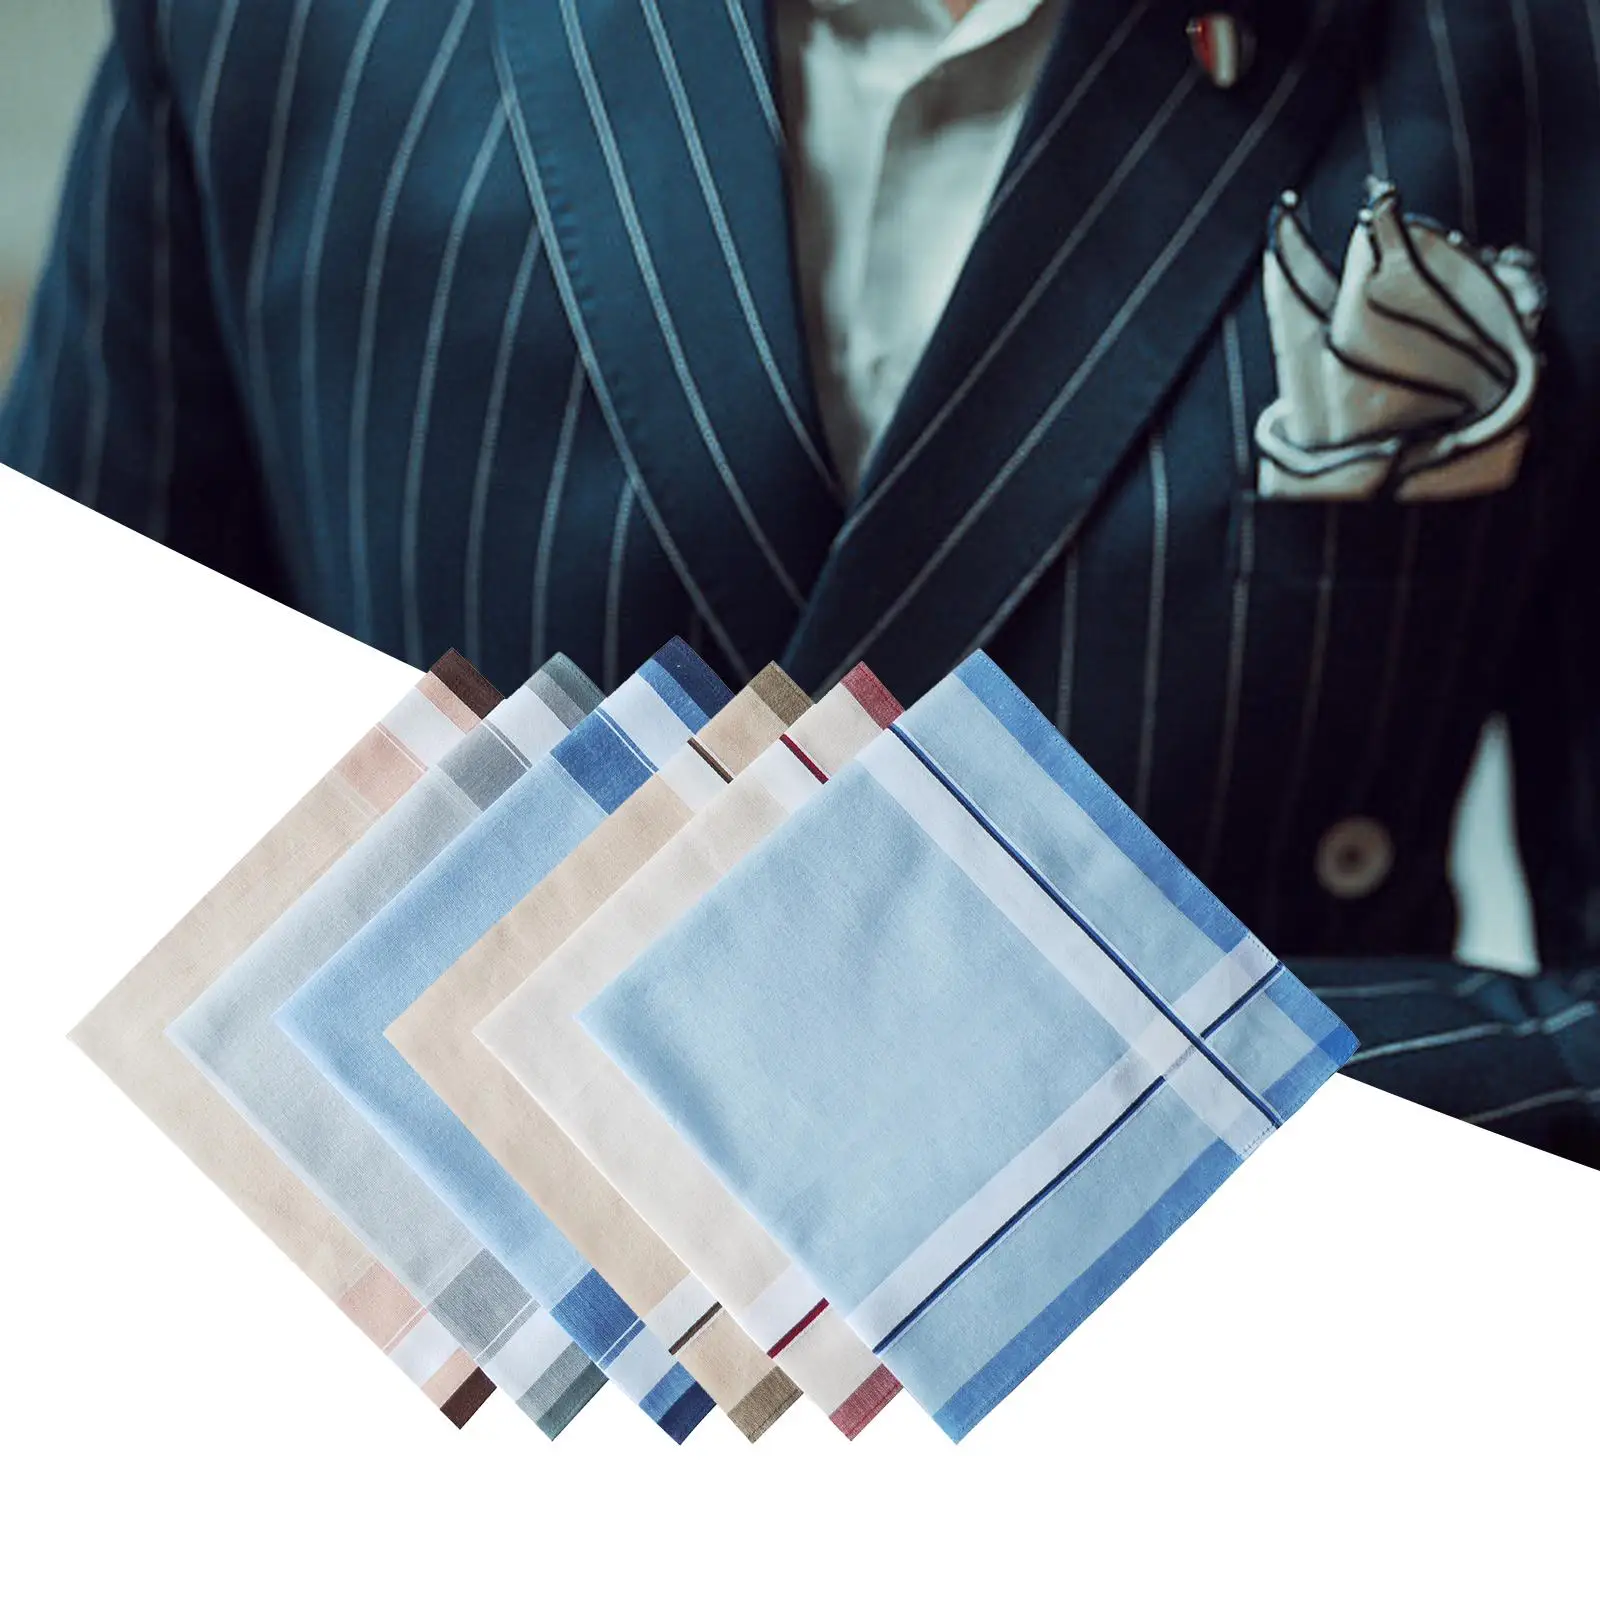 6Pcs Cotton Men`s Handkerchiefs Bandanas Gifts Wipe The Sweat Towels Pocket Square Hankies for Suit Father Casual Party Birthday